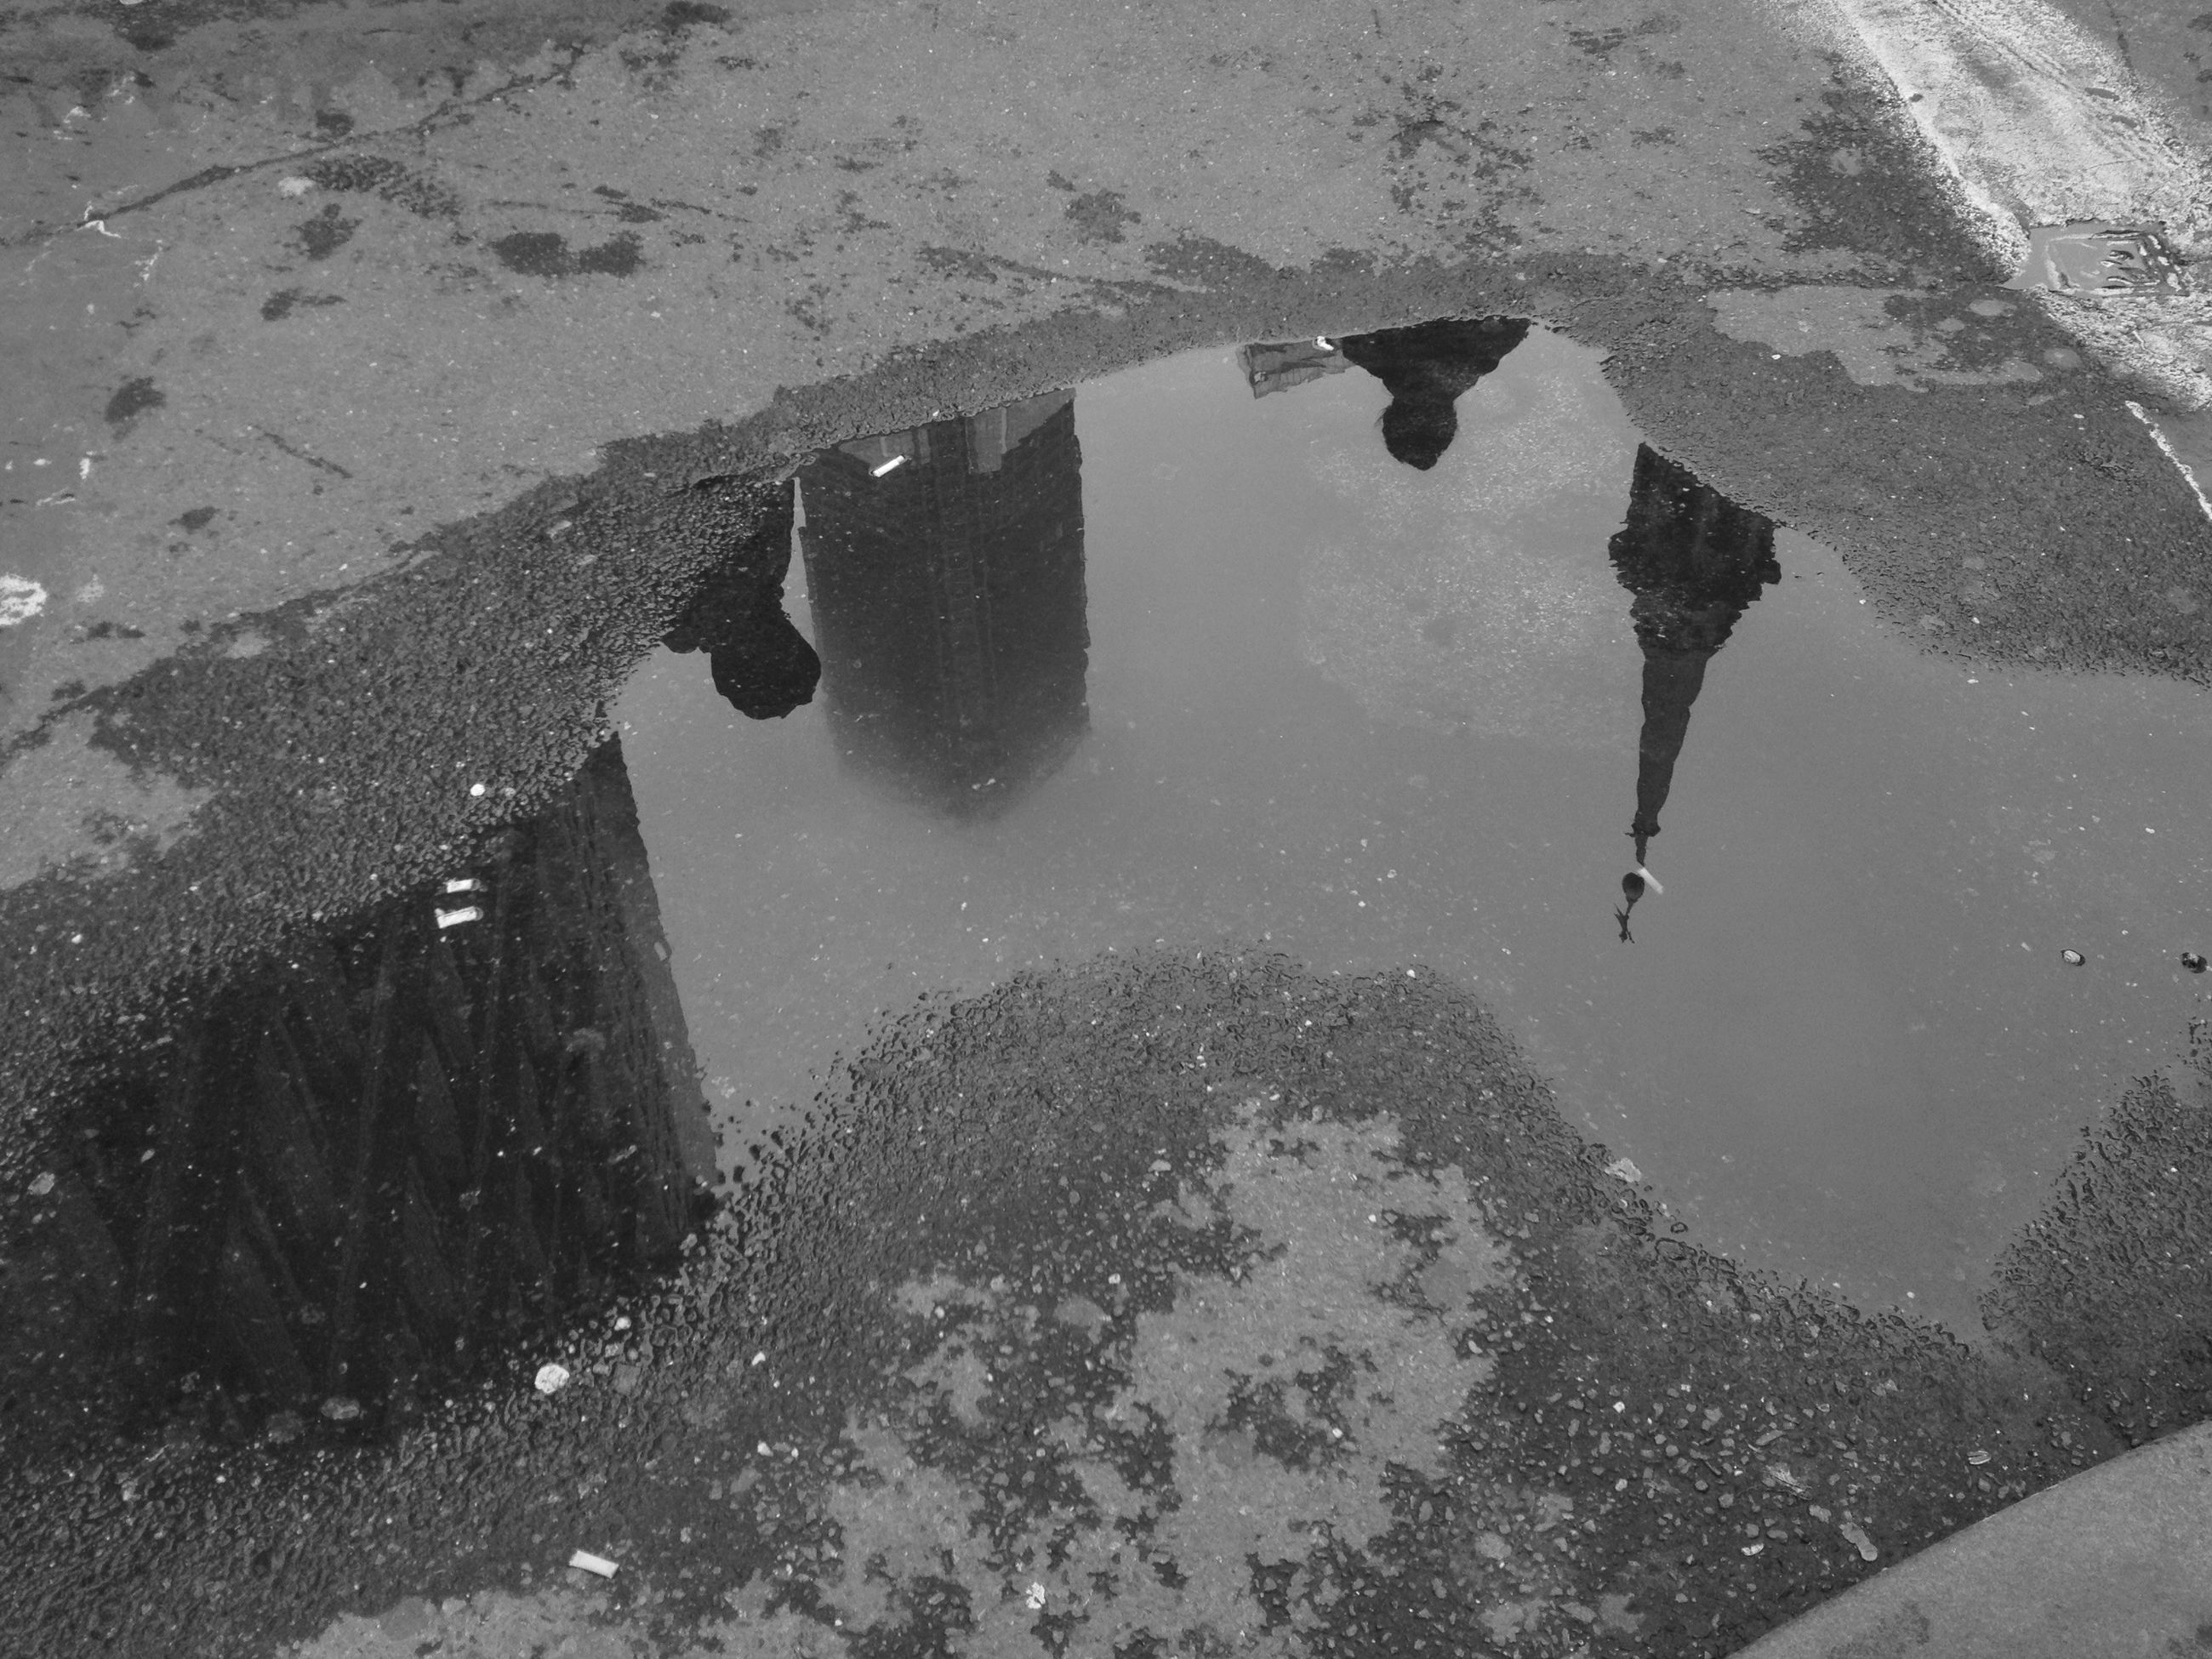 water, puddle, reflection, wet, high angle view, rain, season, weather, drop, street, nature, standing water, day, outdoors, no people, lake, monsoon, frozen, winter, waterfront